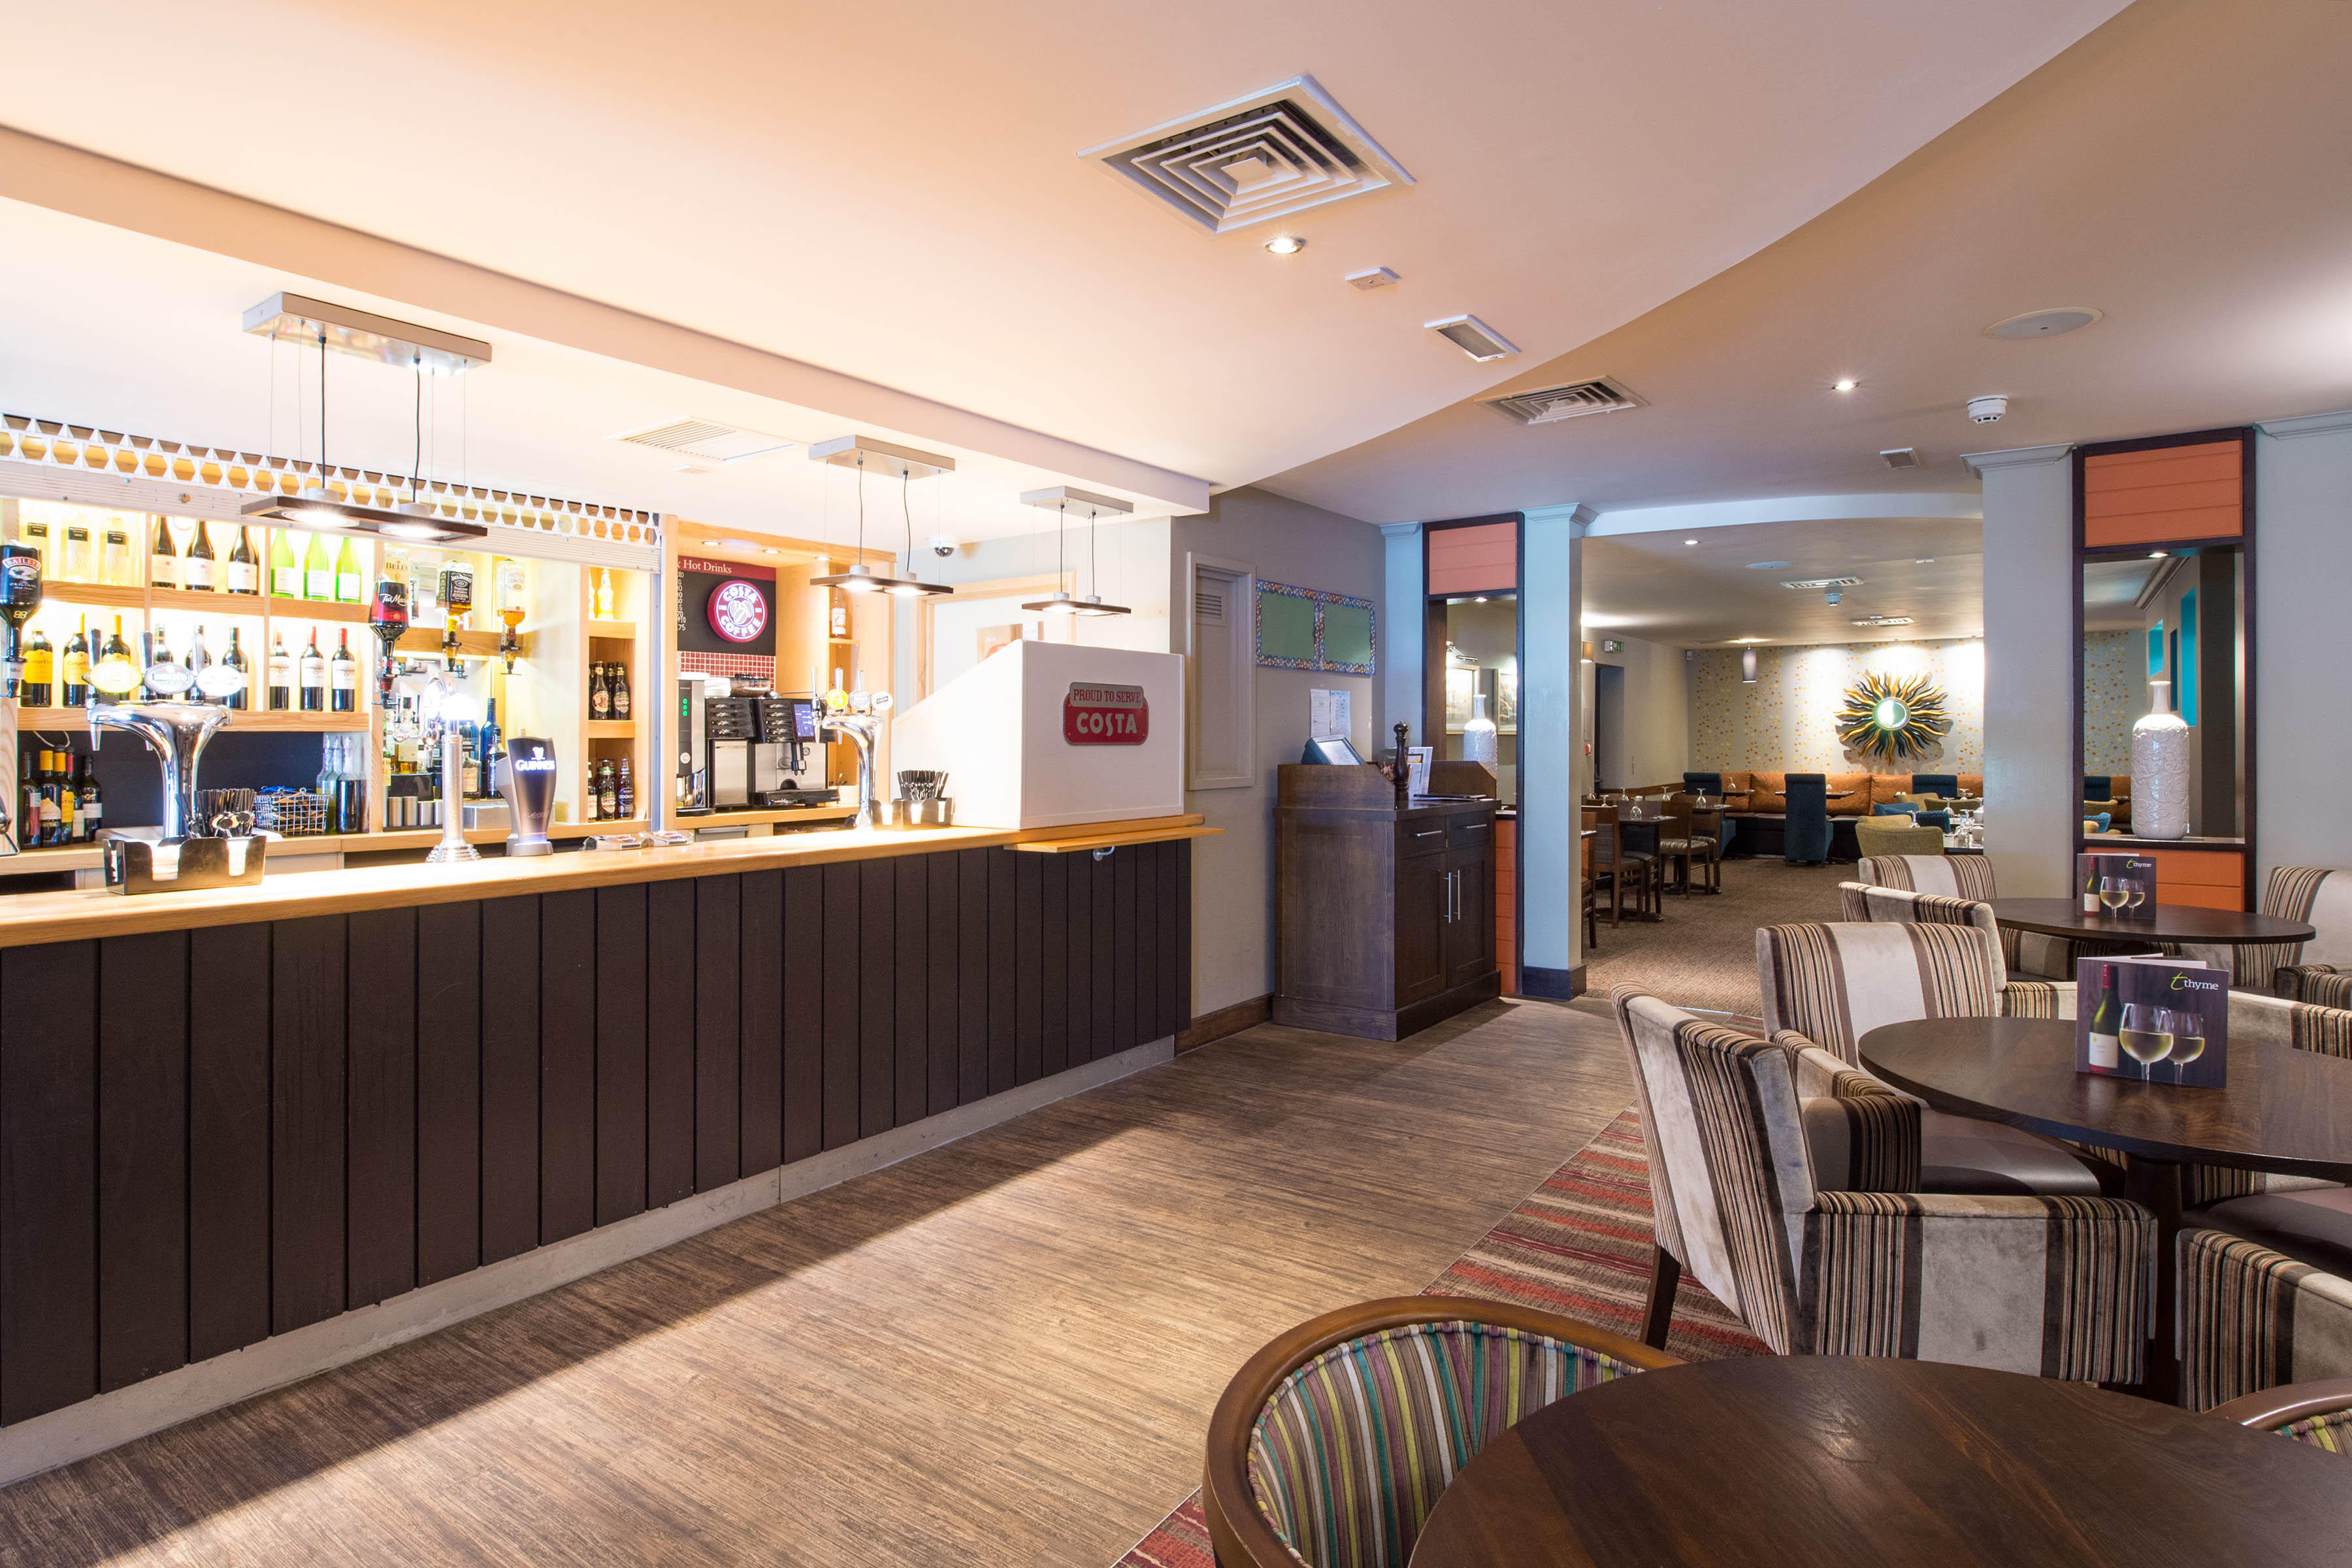 Images Premier Inn Bournemouth Westbourne hotel